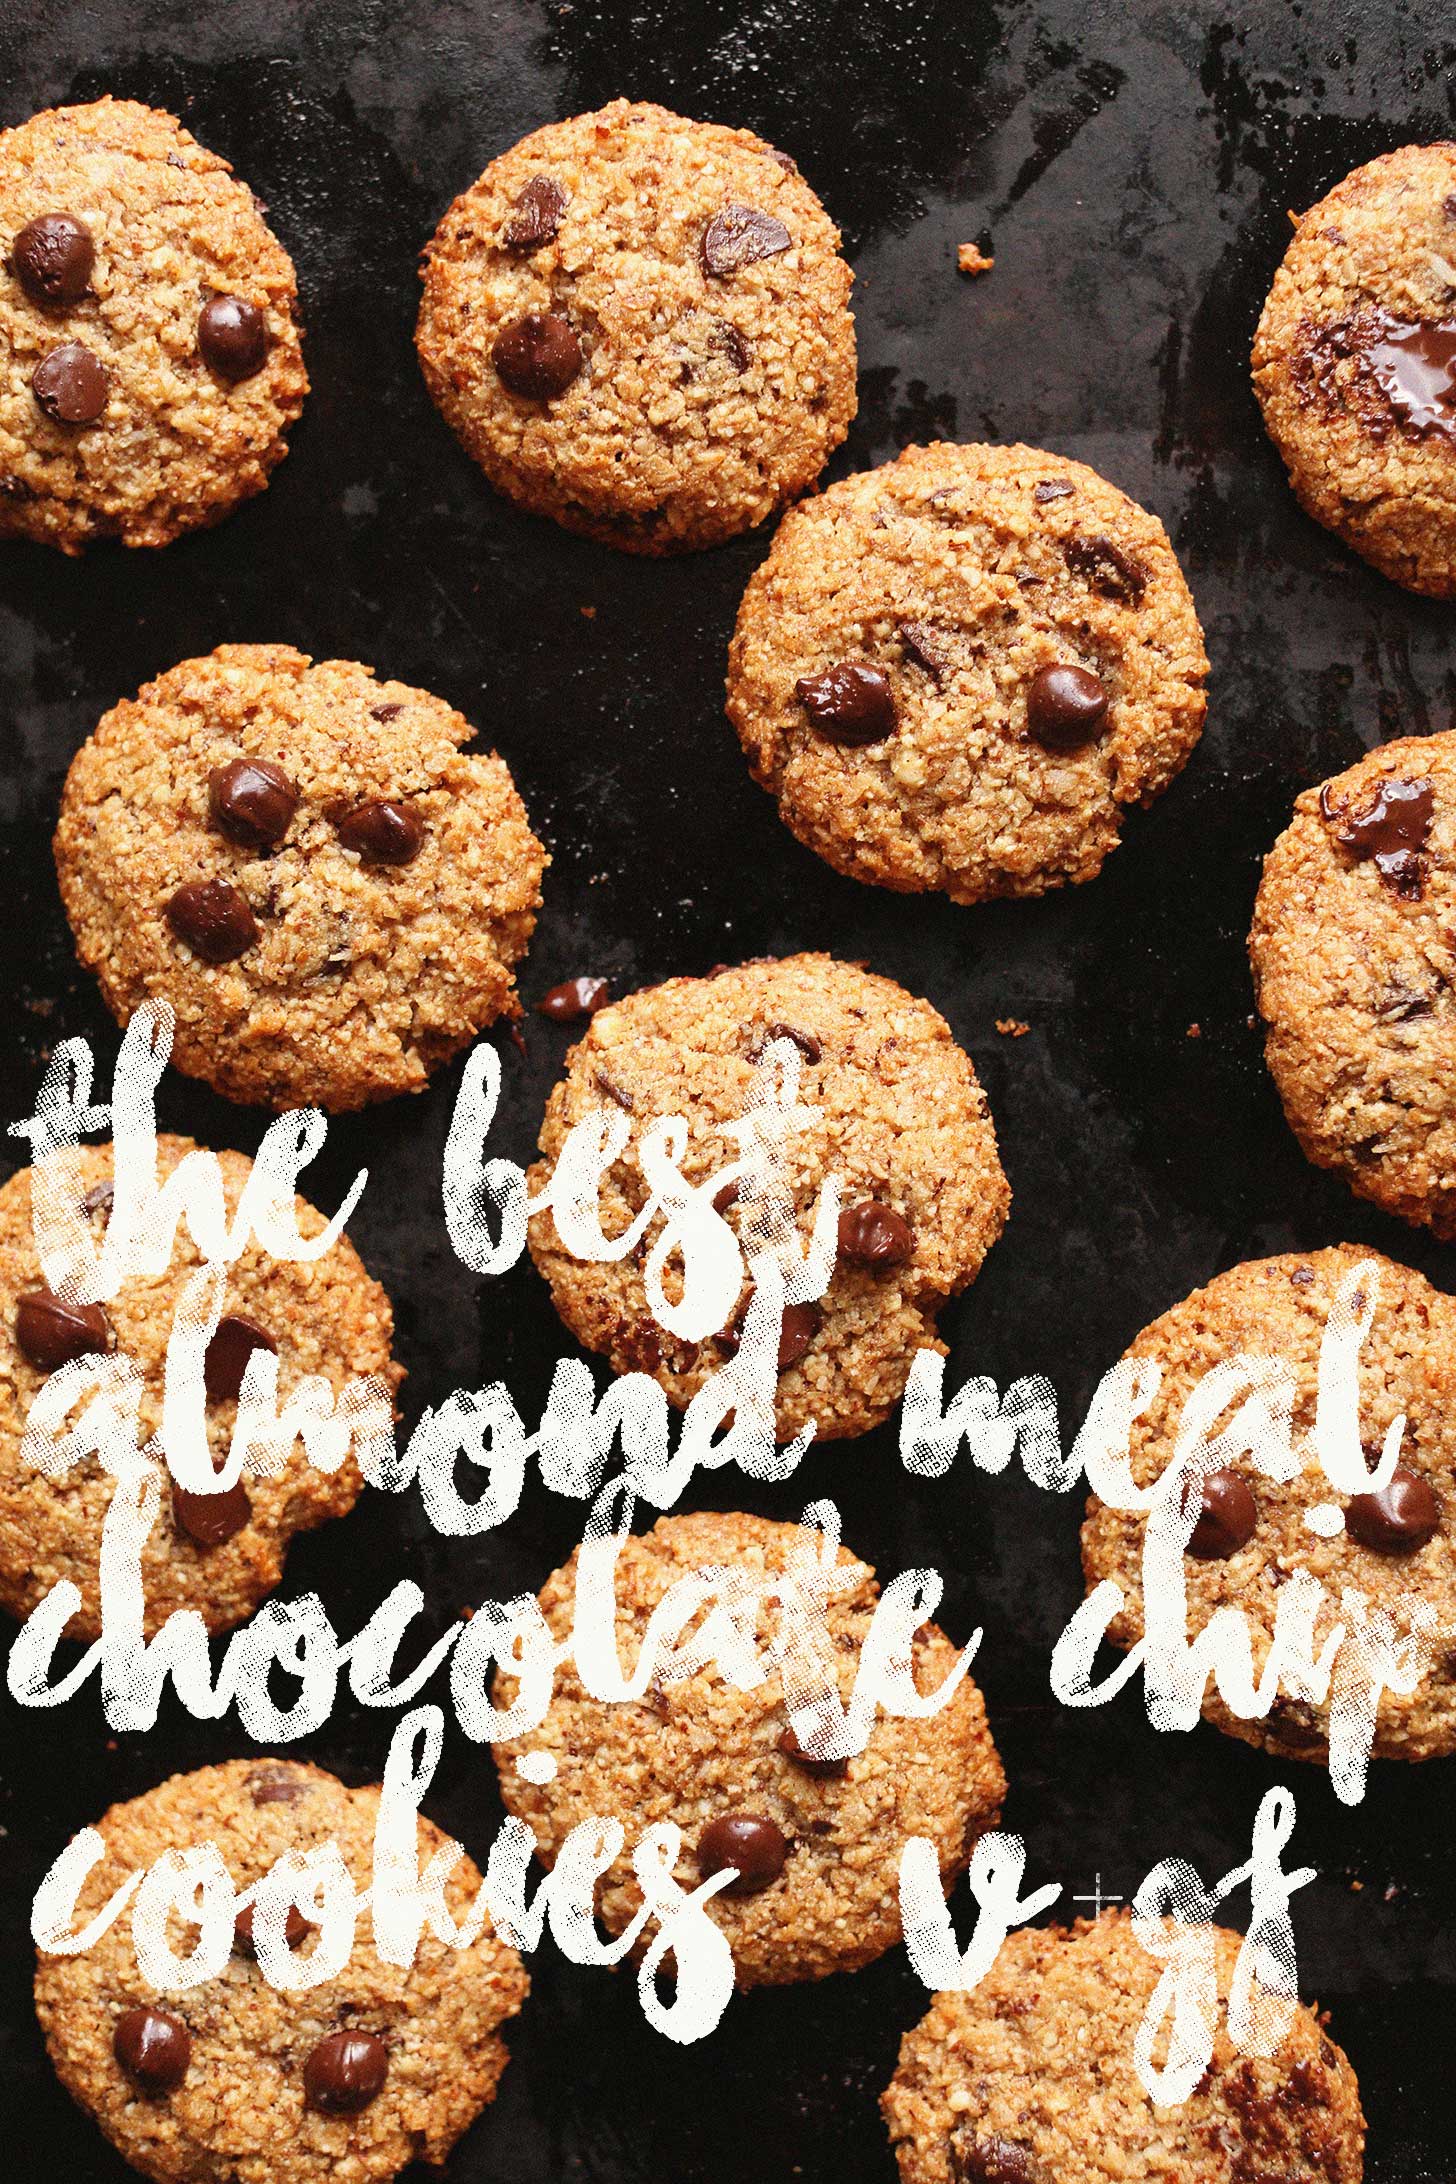 The-best-almond-meal-chocolate-chip-cookies-with-coconut-9-ingredients-and-so-delicious-vegan-glutenfree-cookies-chocolatechip